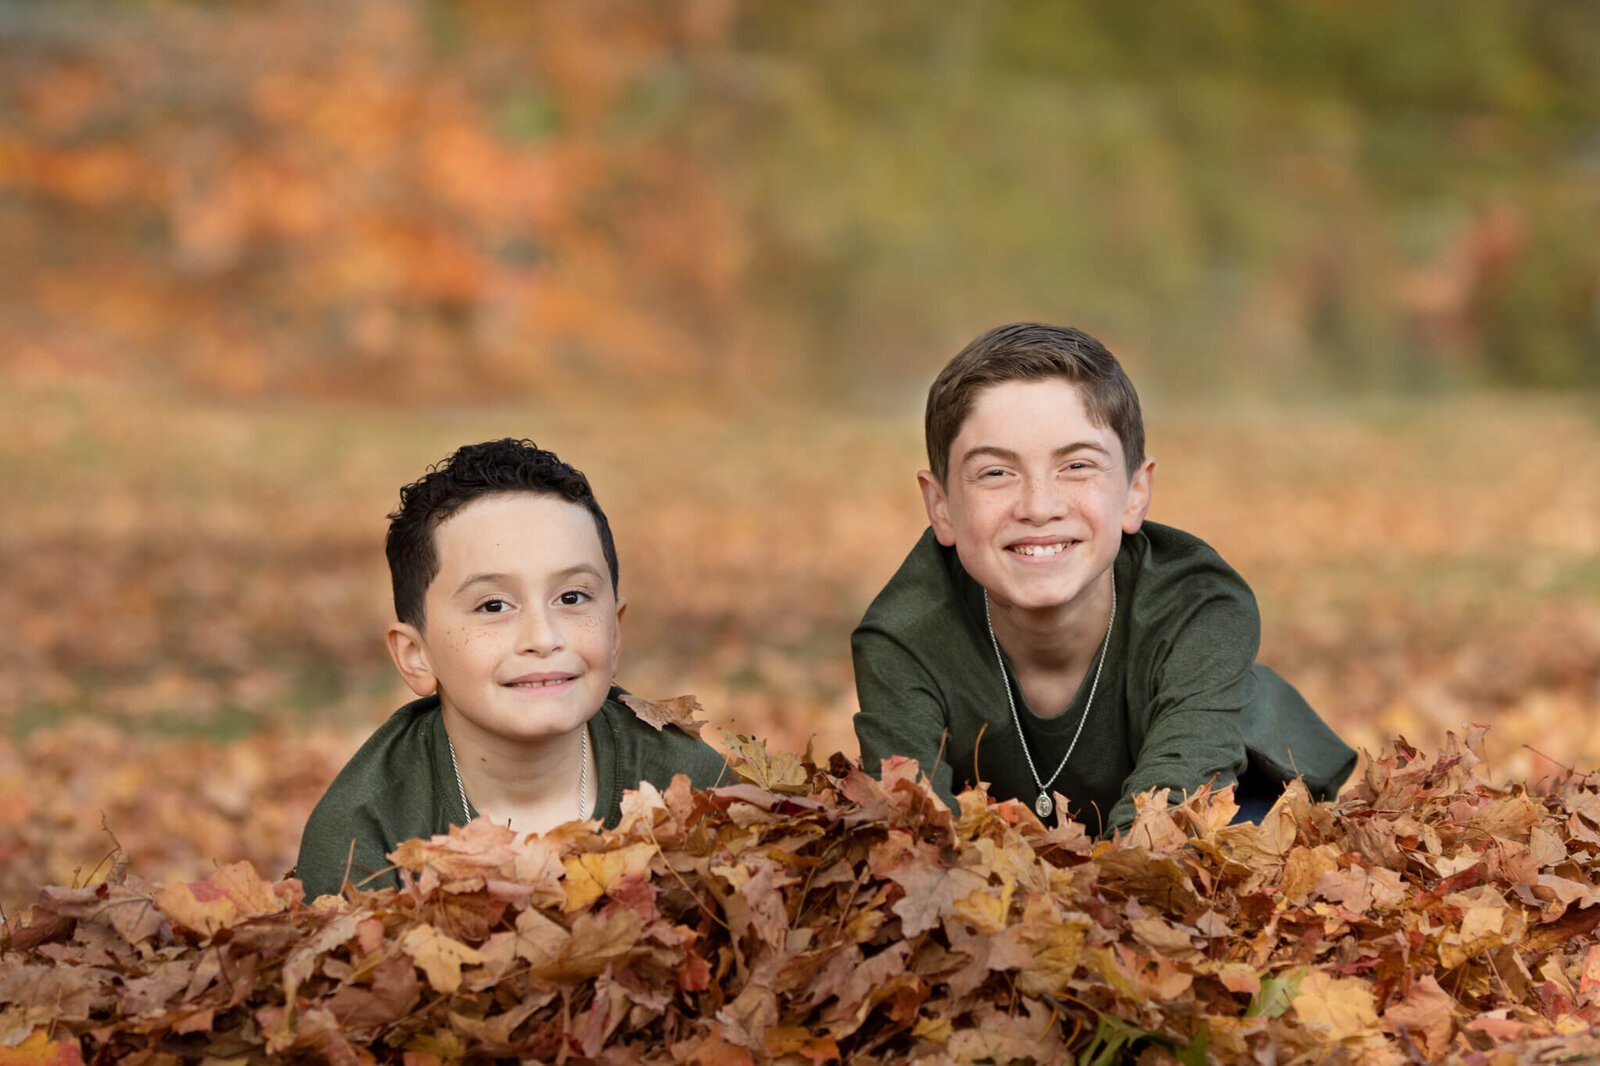 Two boys wearing green shirts laying in a pile of leaves smiling